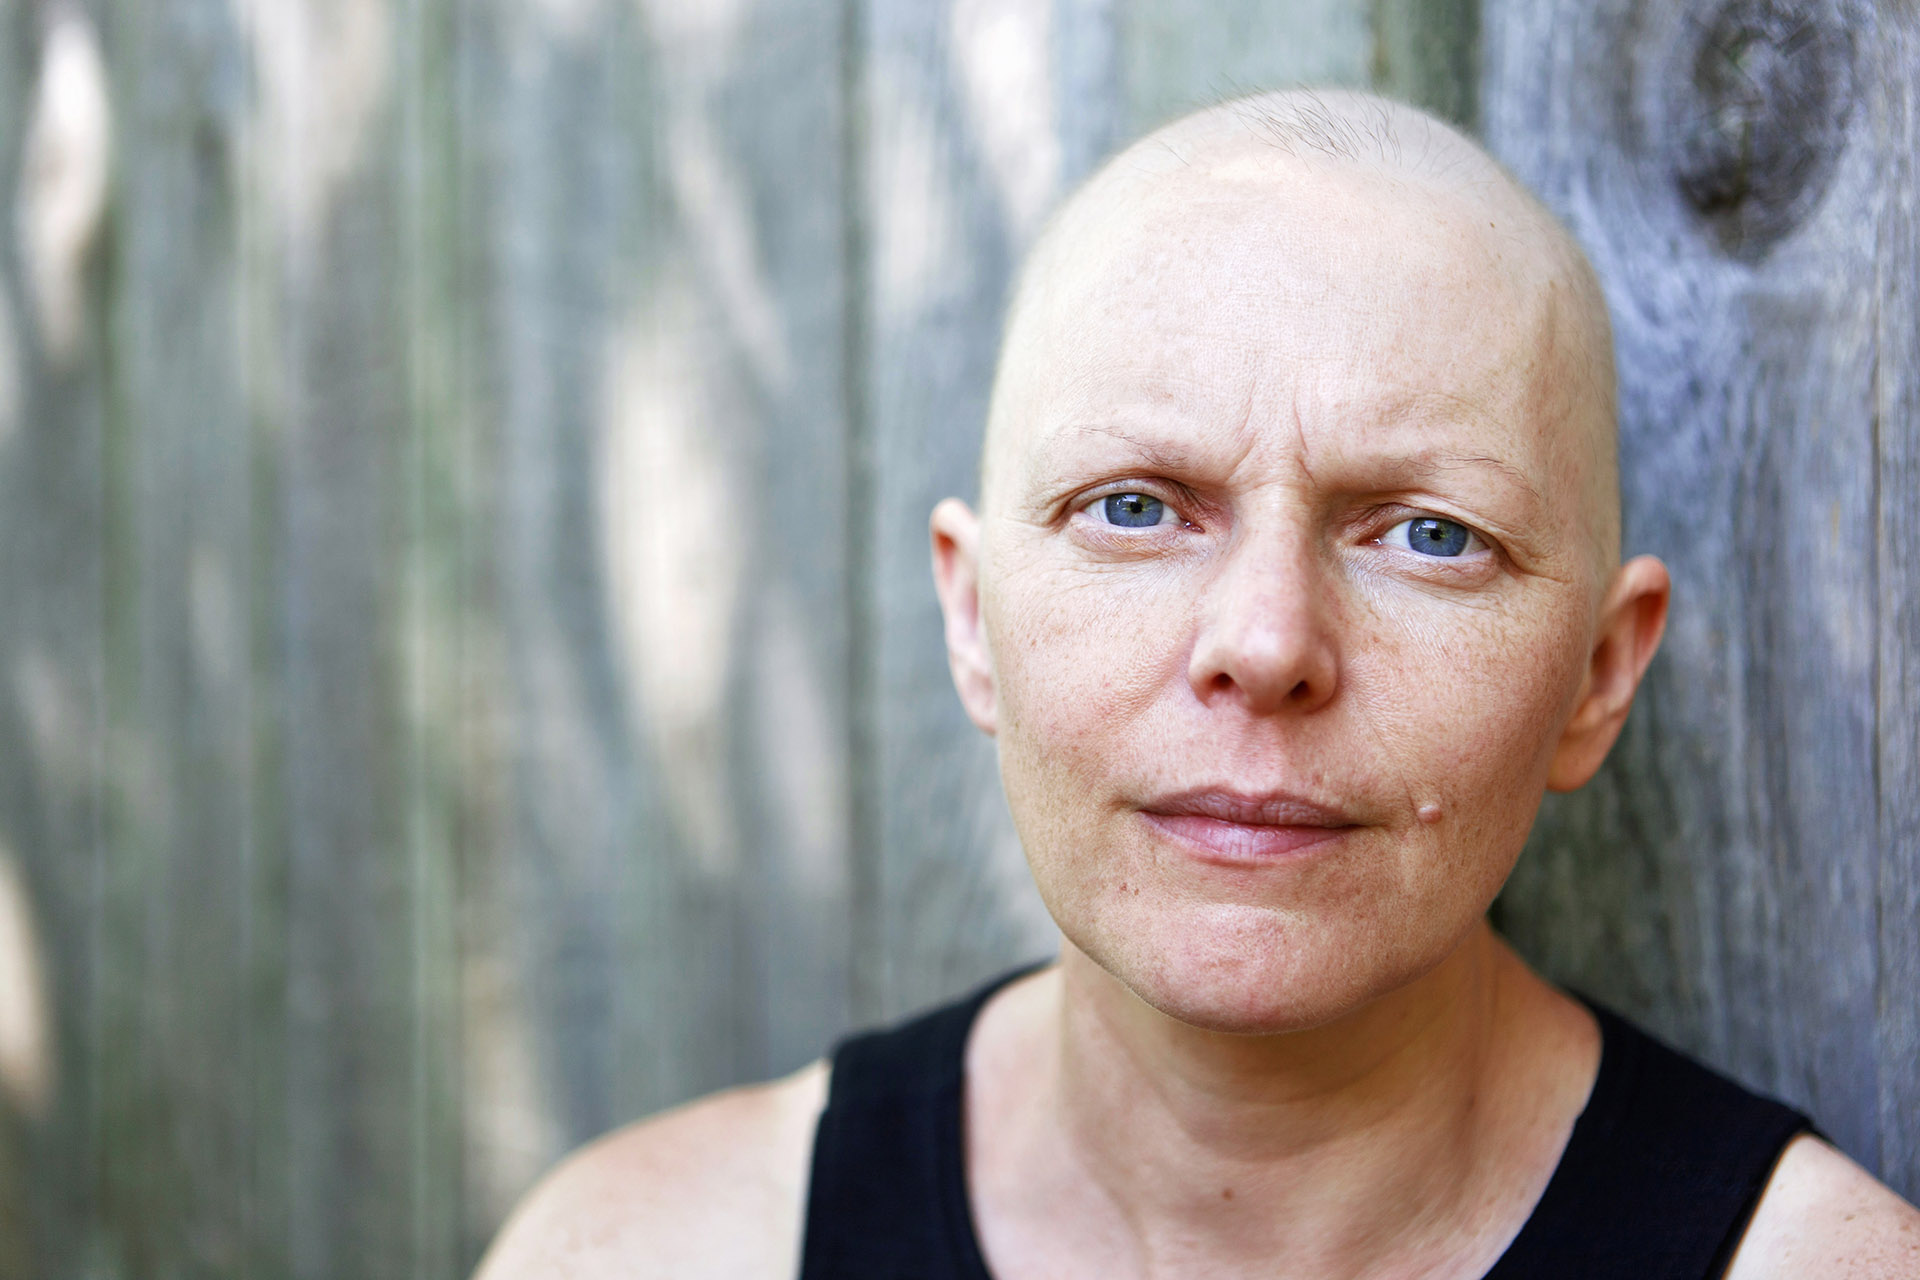 A woman being treated for breast cancer using chemotherapy poses for a portrait.